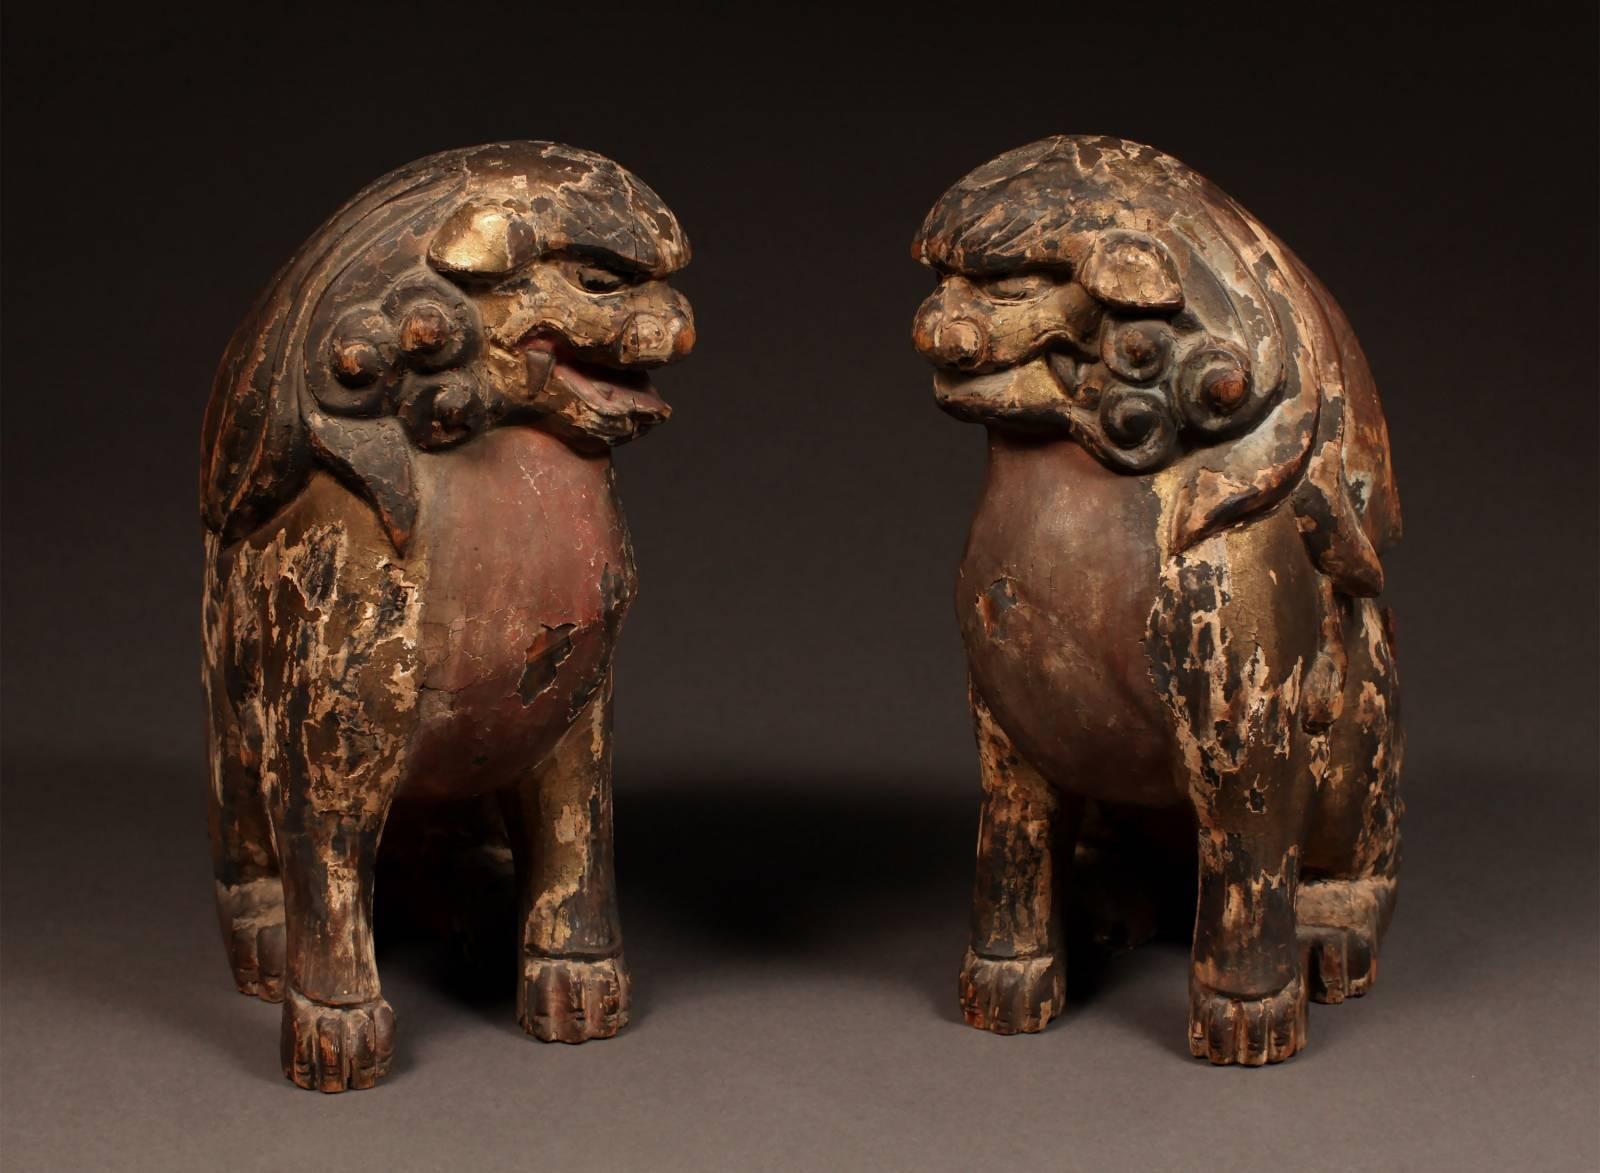 Offered by Vicki Shiba.
18th century pair of polychrome wood Shinto lion-dogs, Komainu, from Japan.

Expressively carved of cypress wood with curlicue manes and tails, the natural grain of the wood used to indicate the coils of fur, the mouths